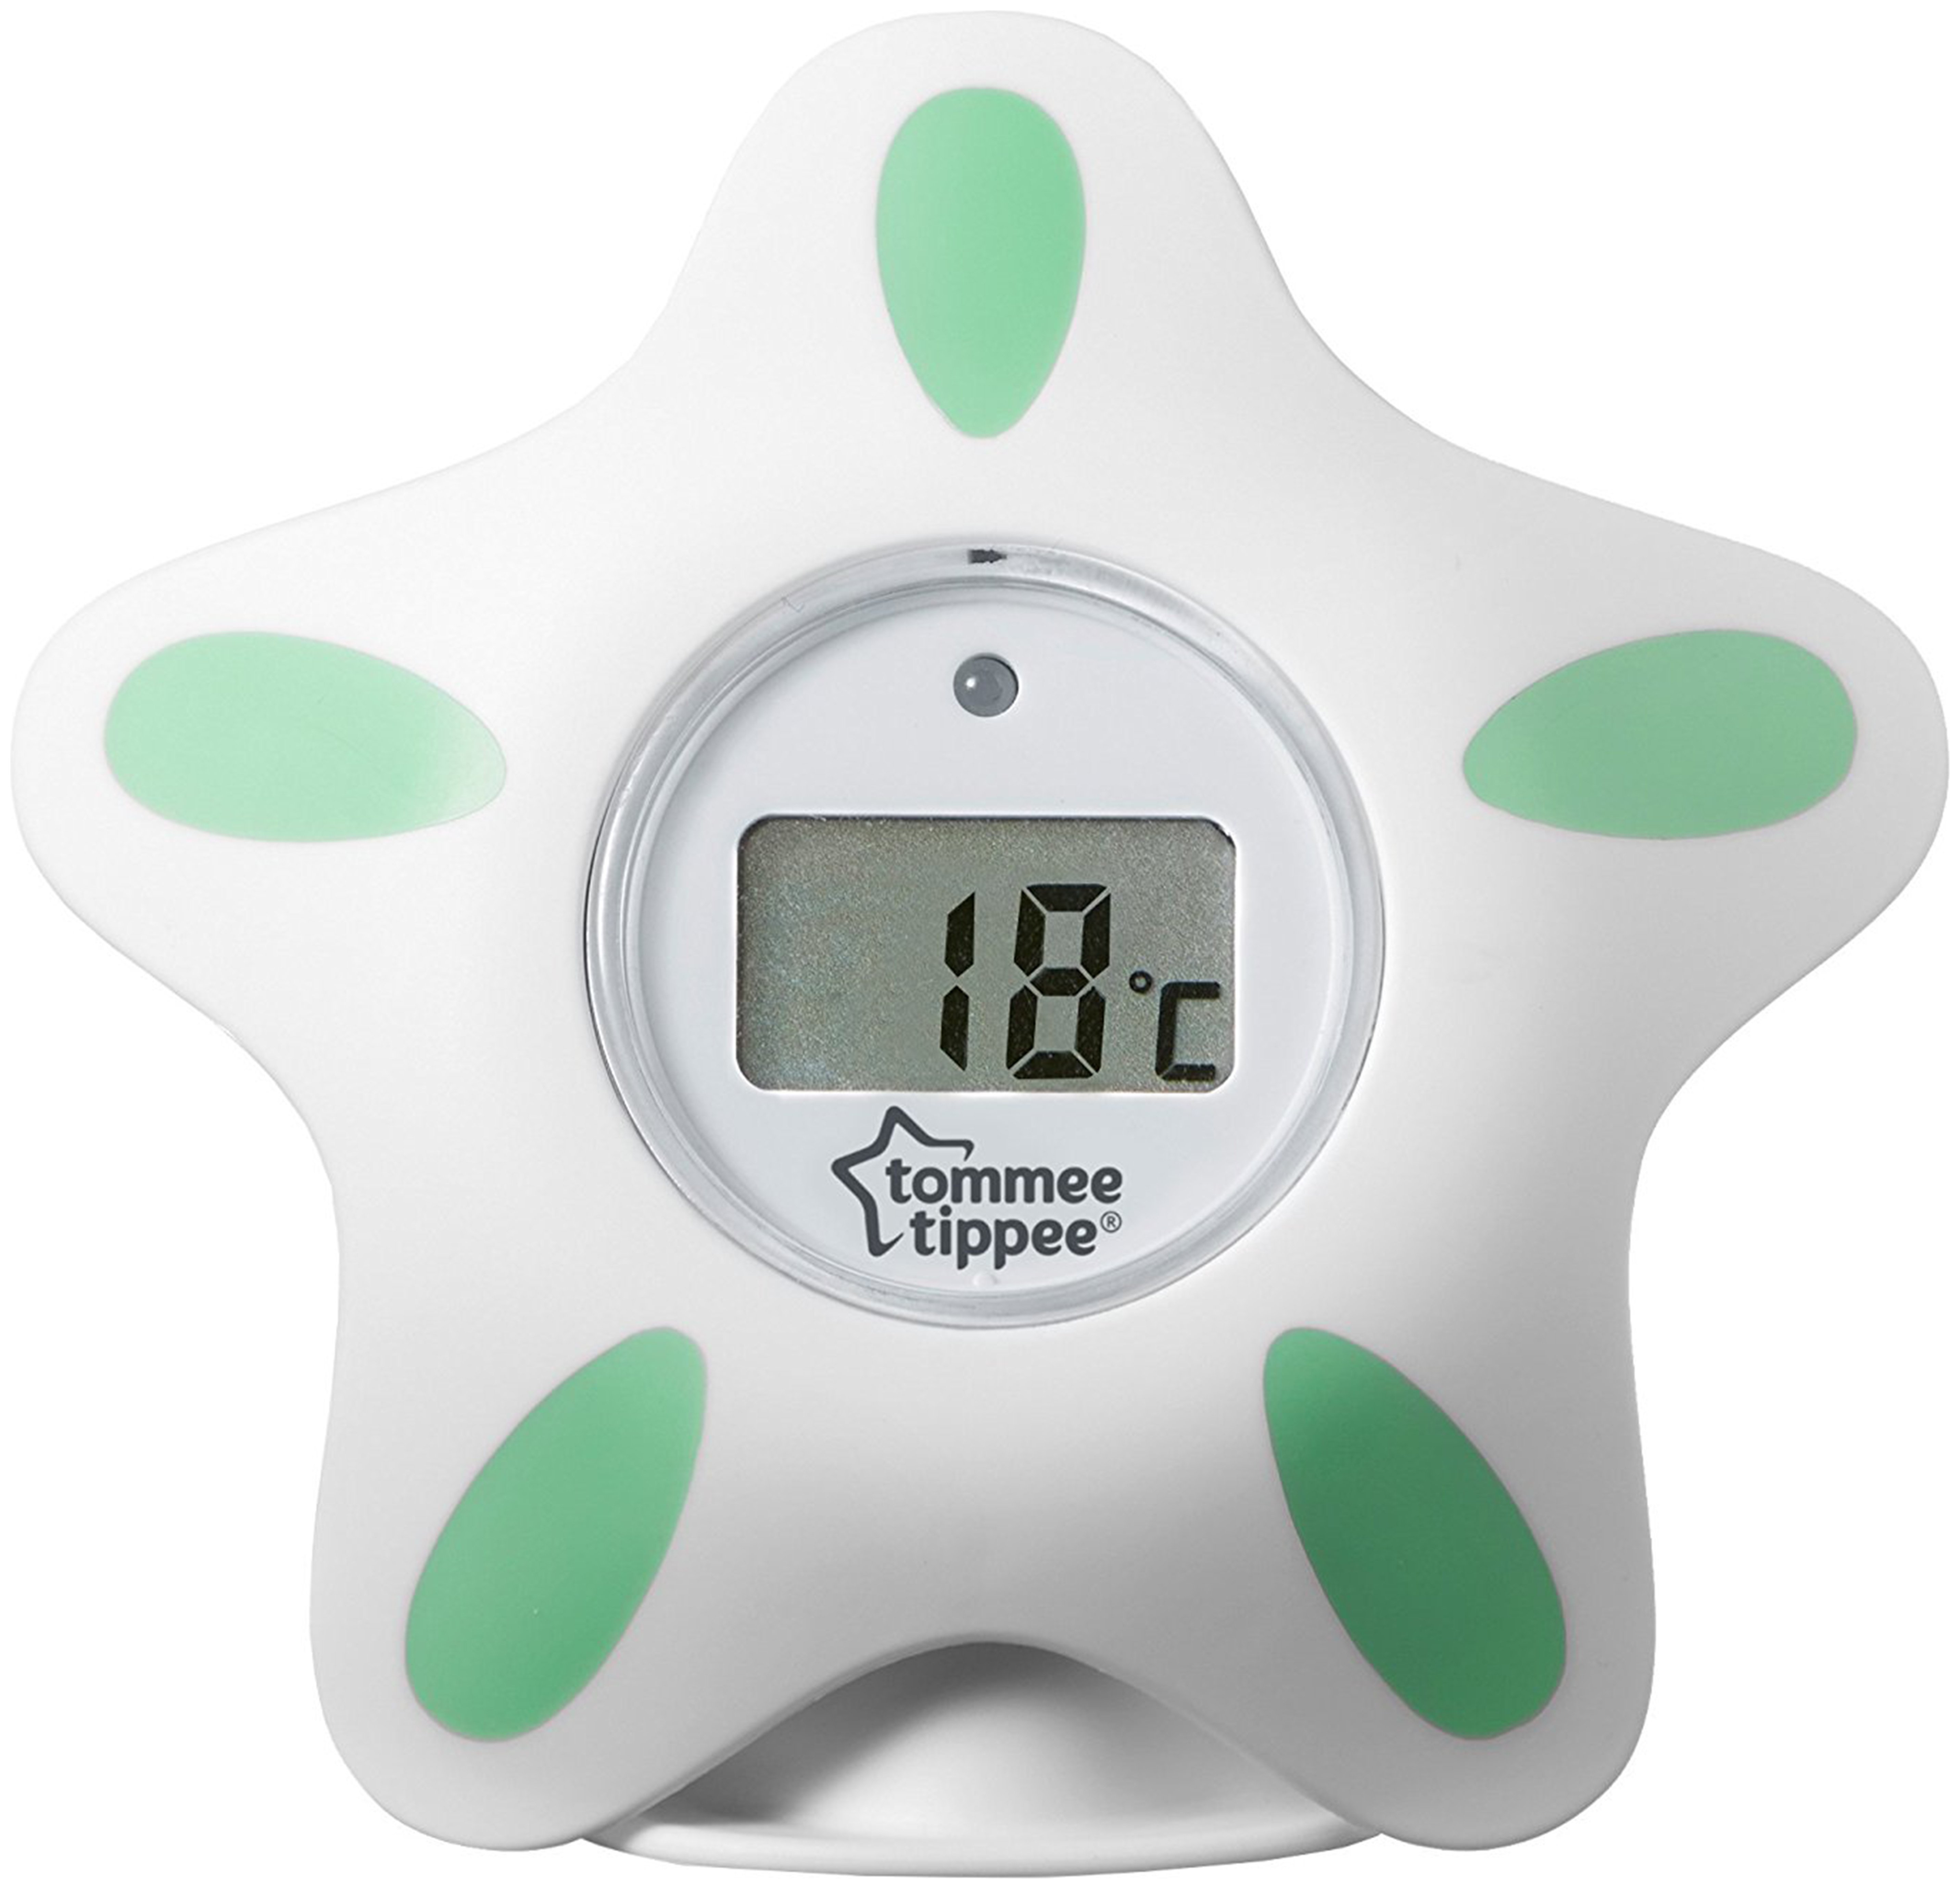 Tommee Tippee Bath & Room Thermometer review